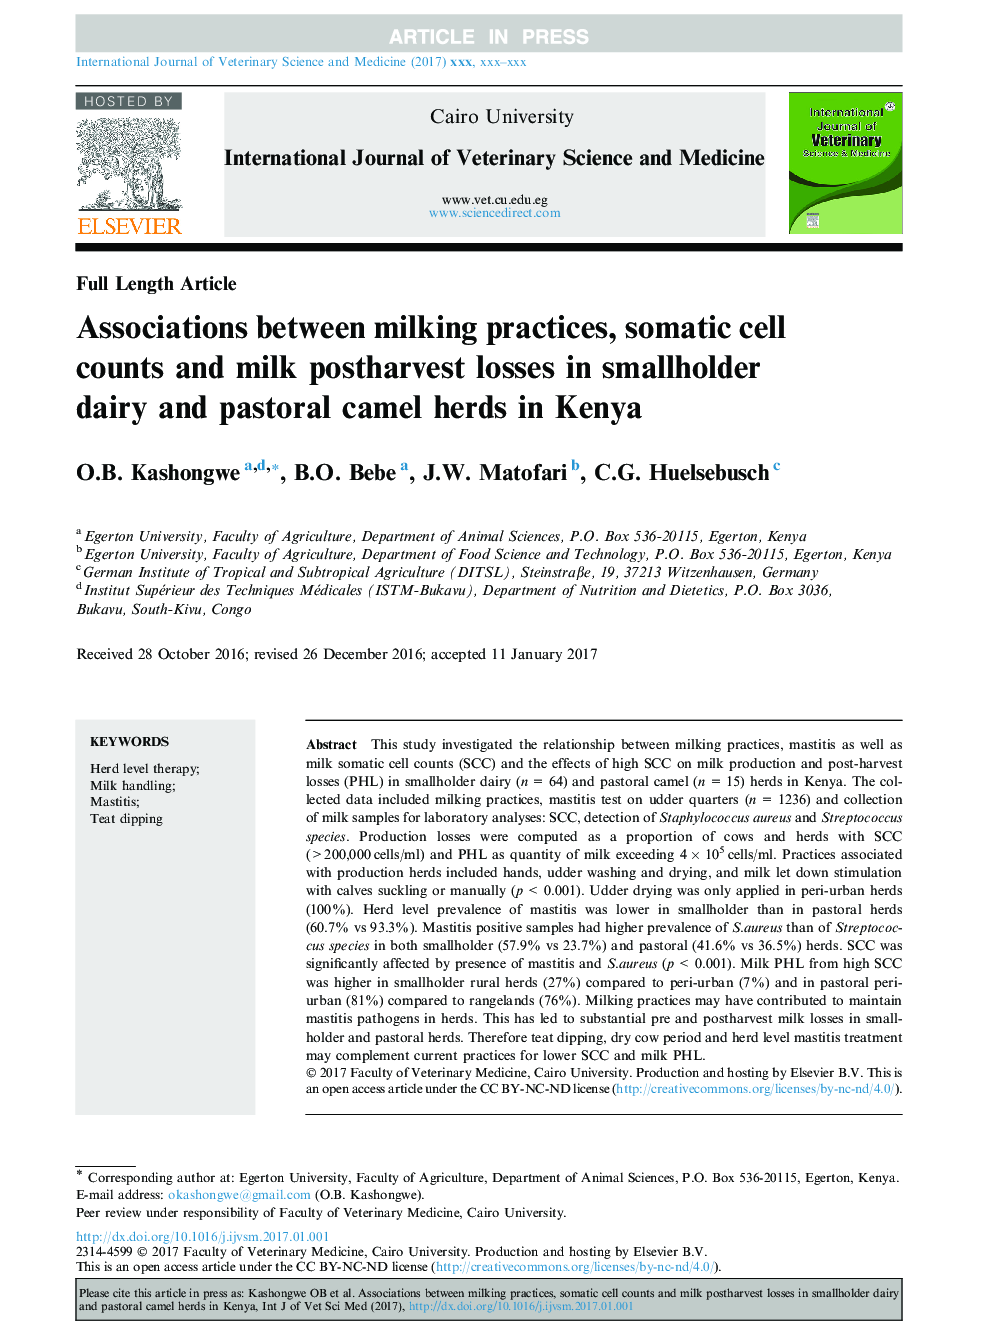 Associations between milking practices, somatic cell counts and milk postharvest losses in smallholder dairy and pastoral camel herds in Kenya